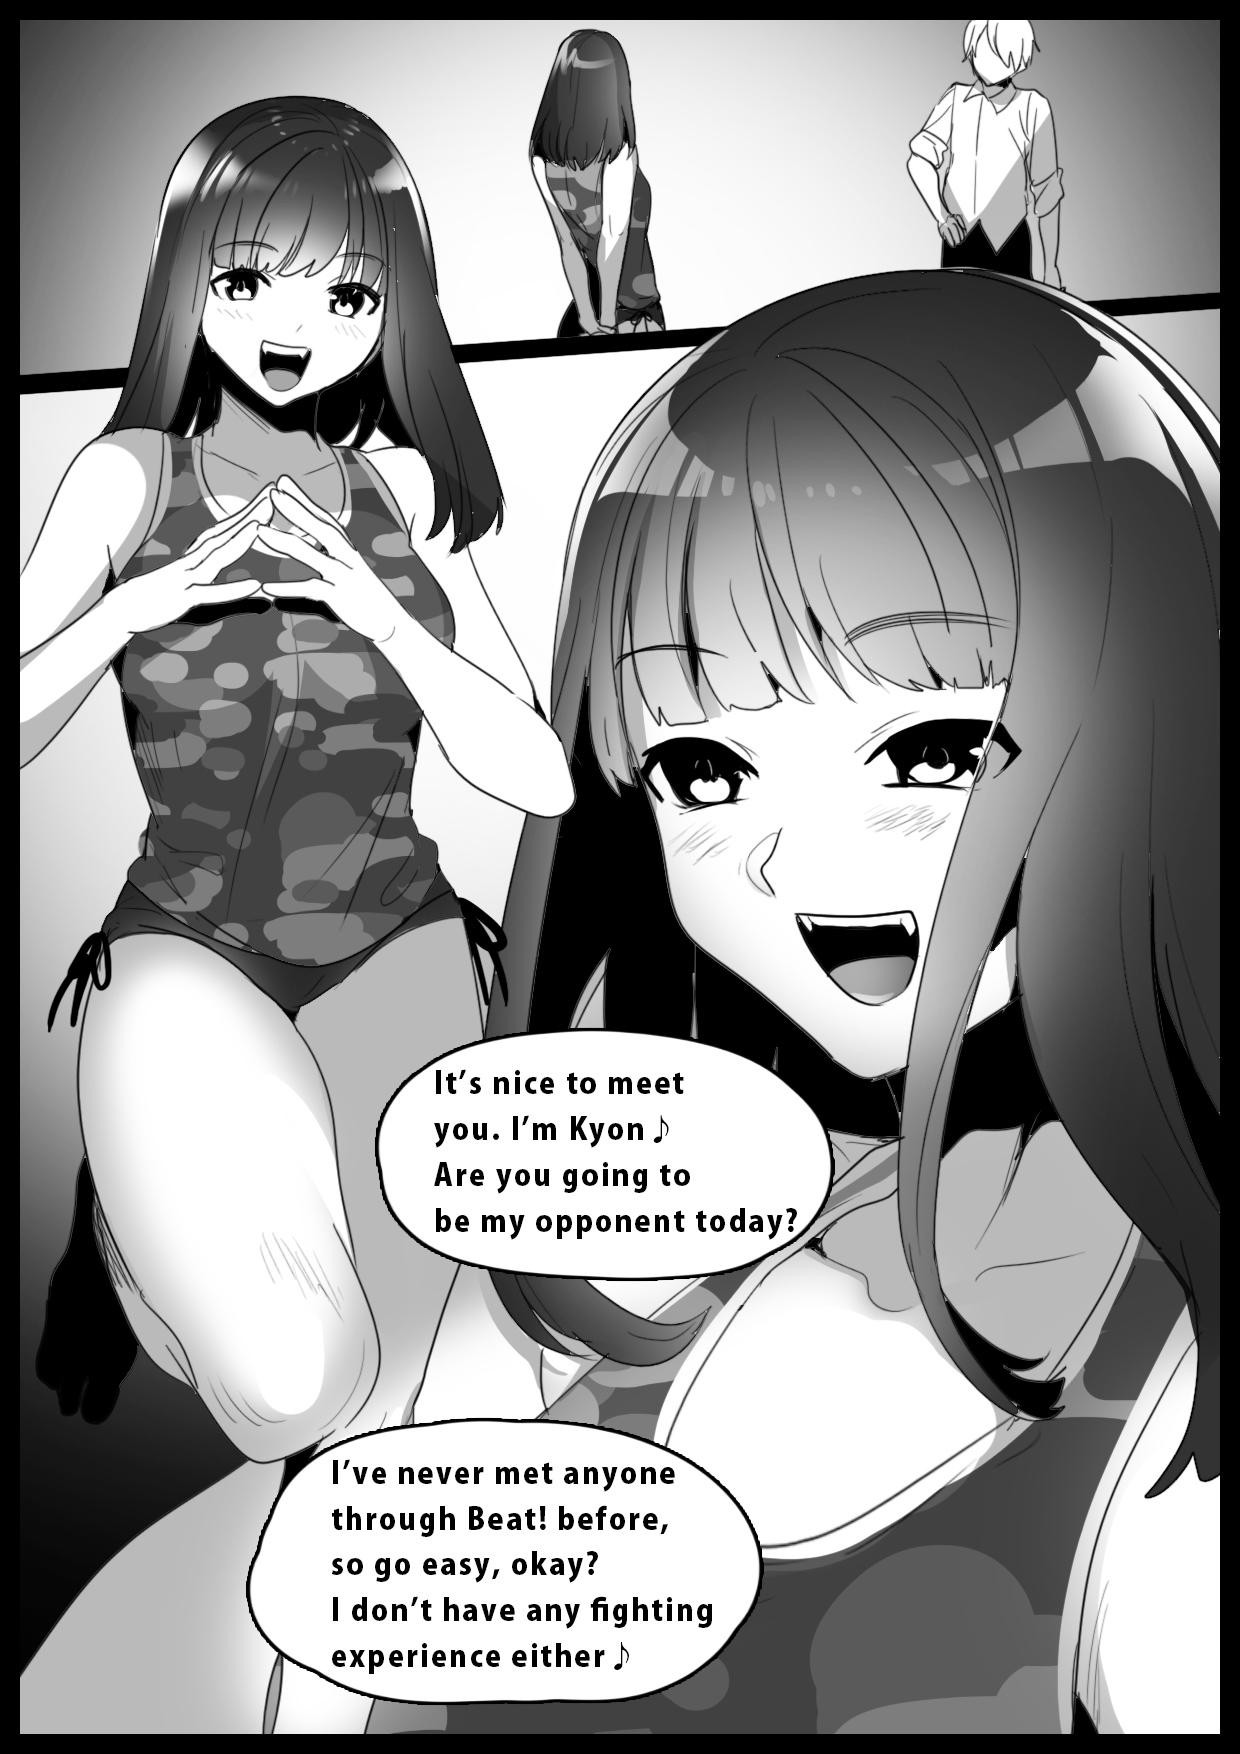 Awesome Girls Beat! vs Kyon - Original Oral - Picture 2